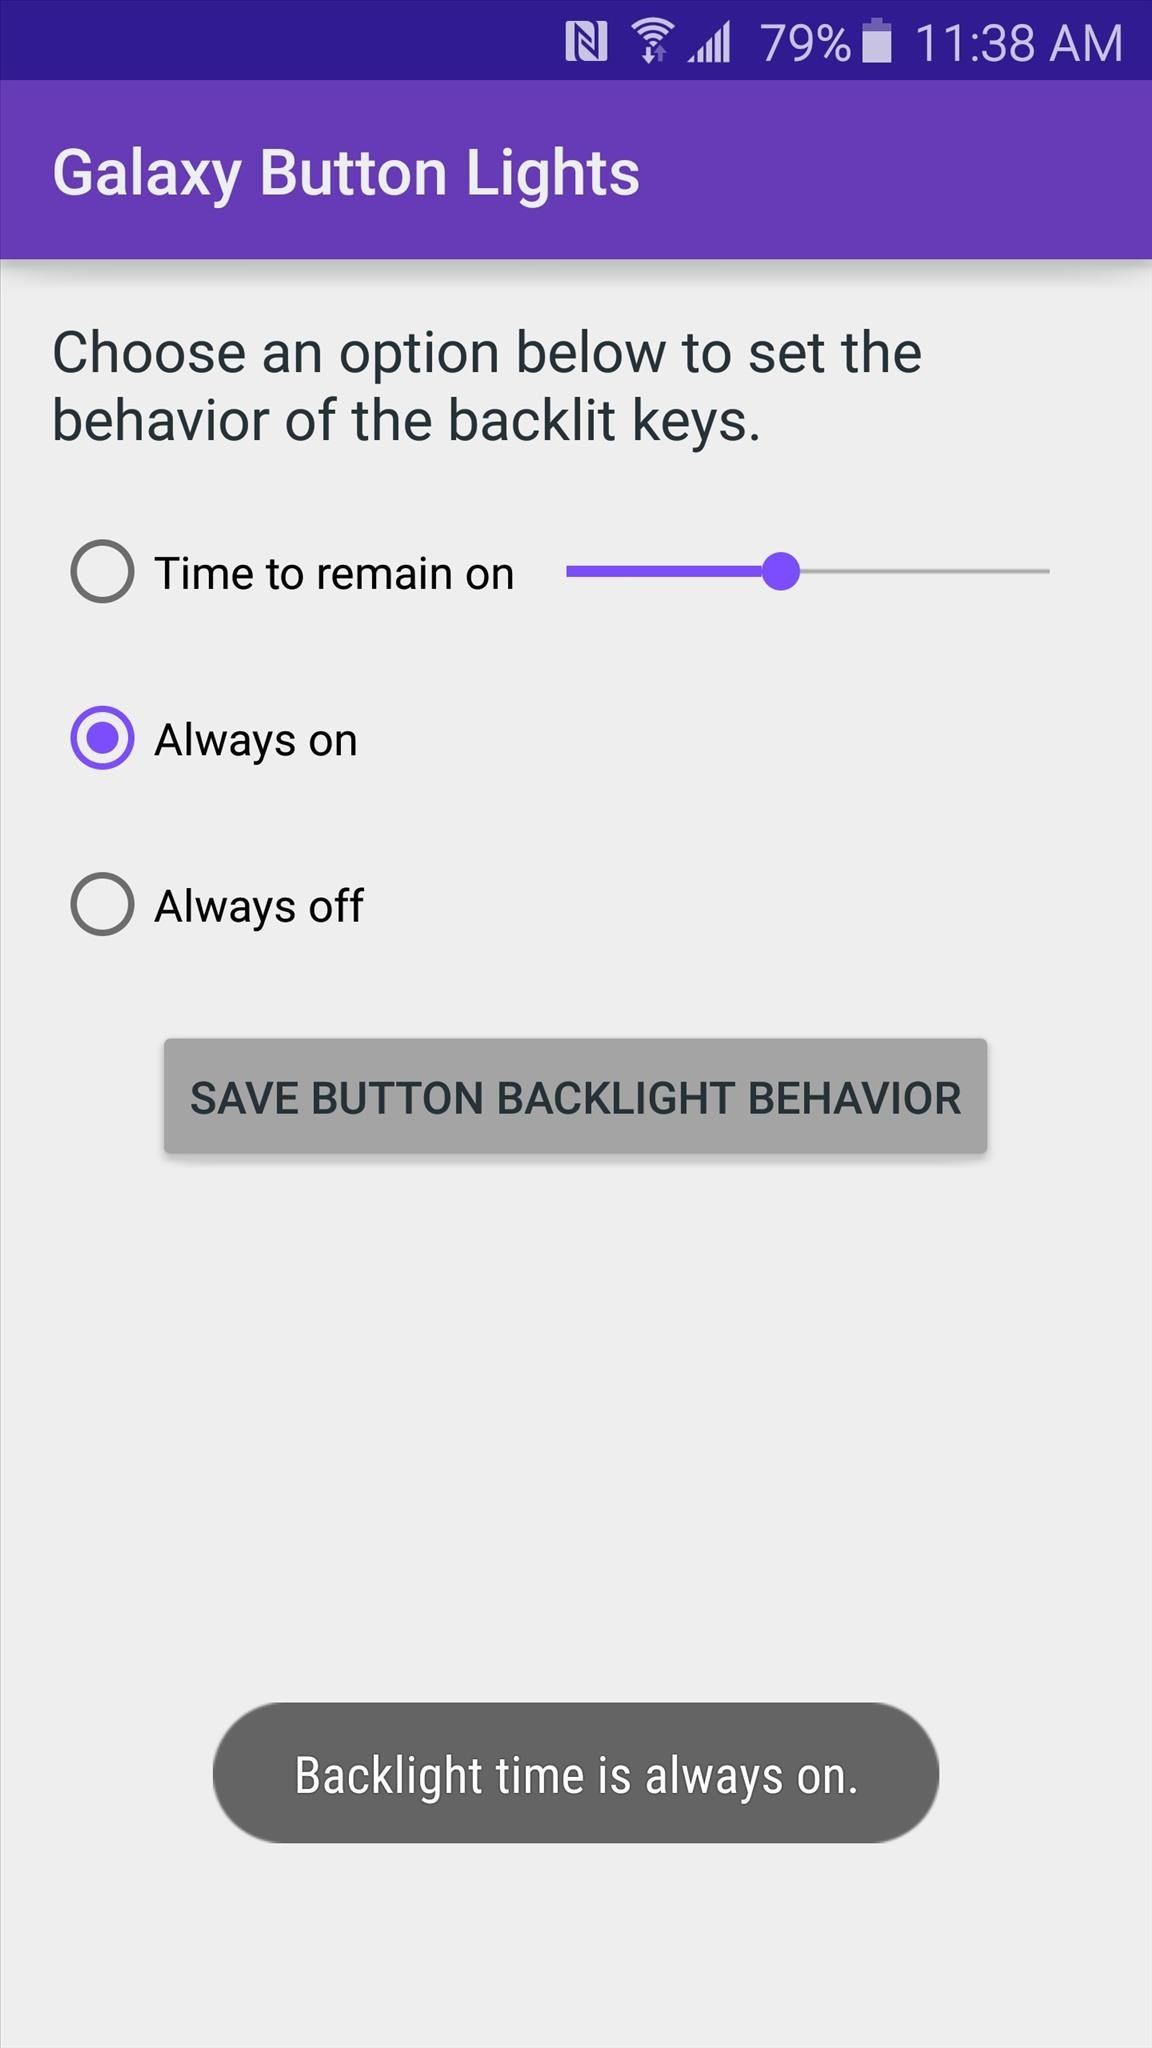 How to Change Backlight Duration for the Back & Recents Keys on the Galaxy S6